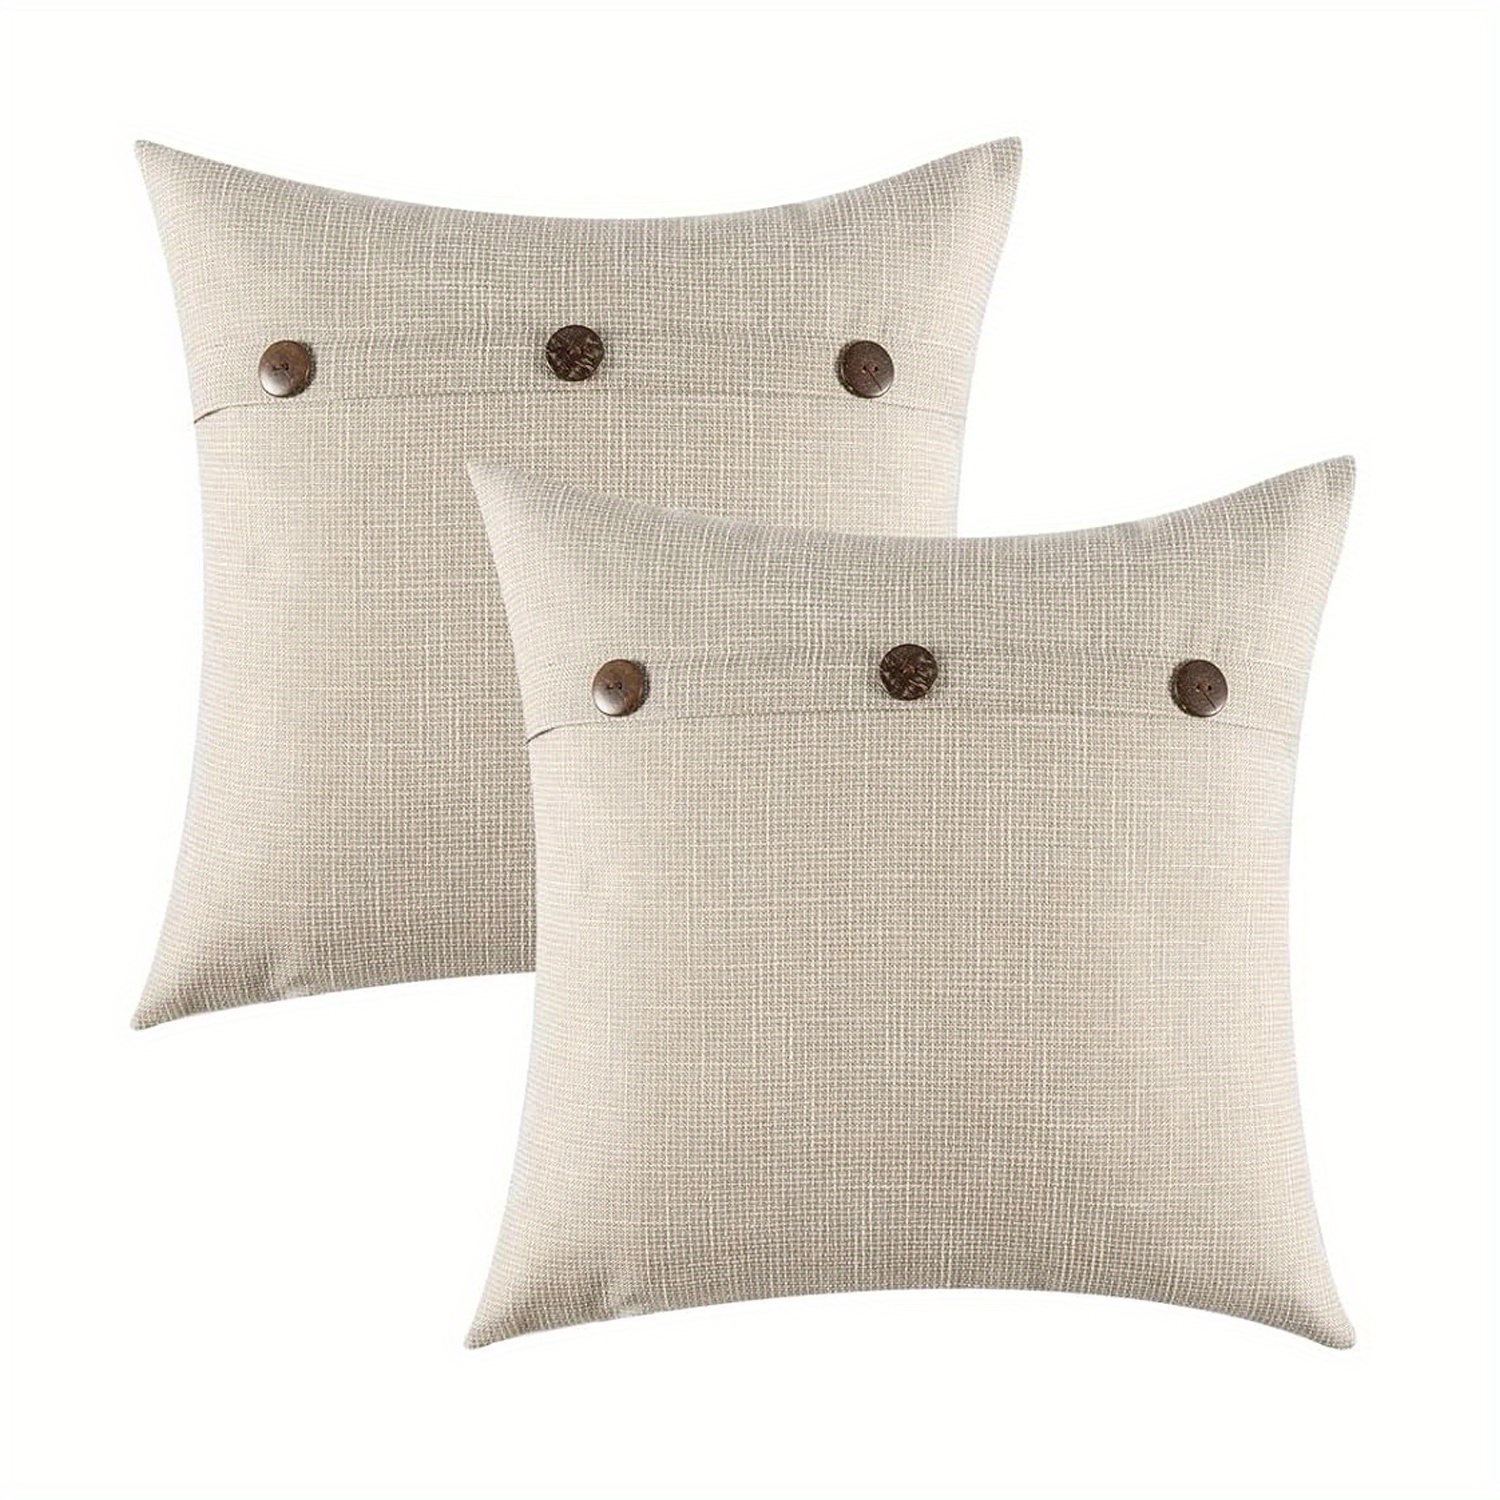 

2 Pack Decorative Linen Throw Pillow Covers Cushion Case Triple Button Vintage Farmhouse Pillowcase For Couch Sofa Bed 16 X 16 Inch Beige